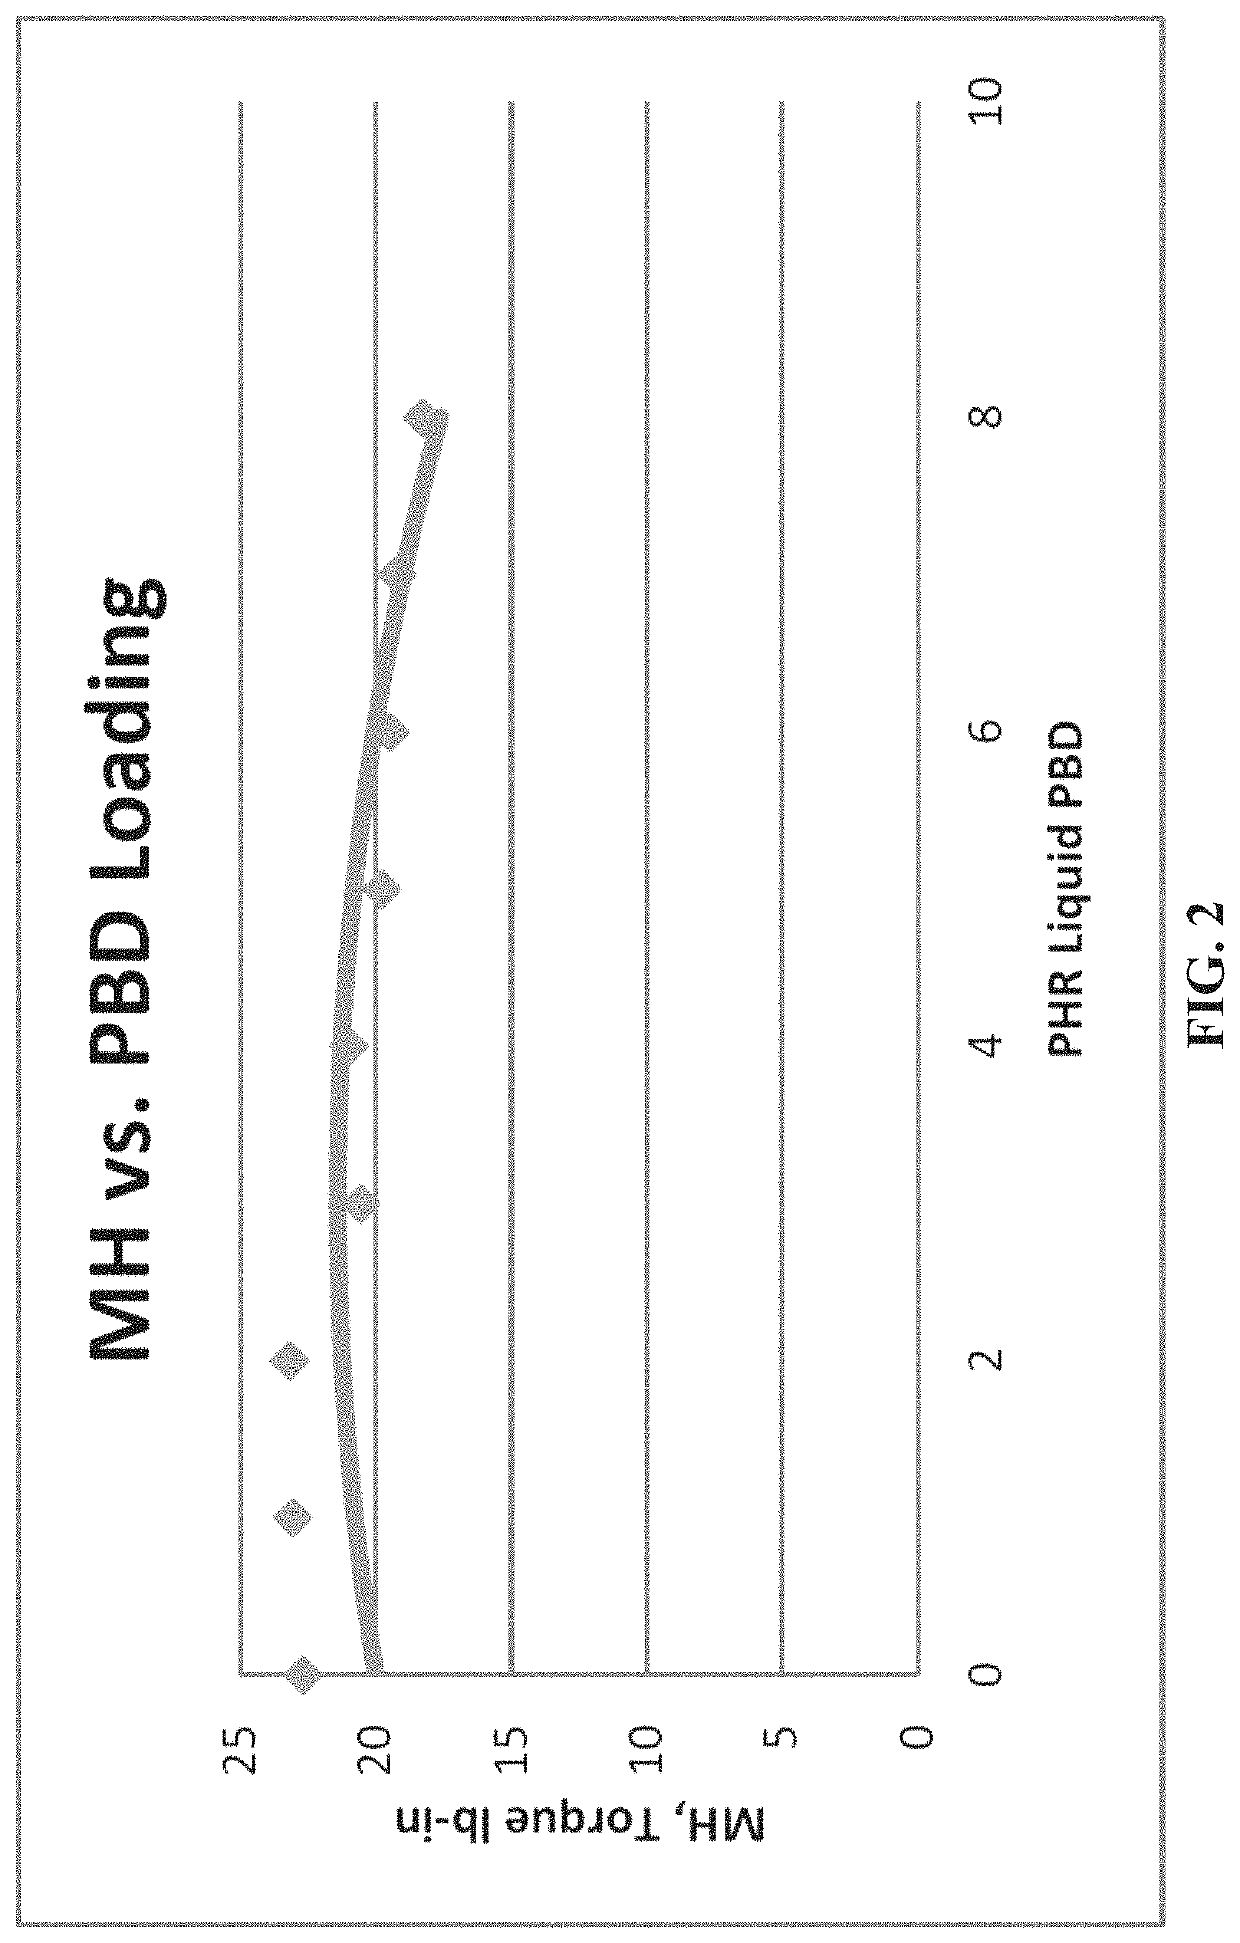 Wear-resistant rubber compositions, systems, and methods